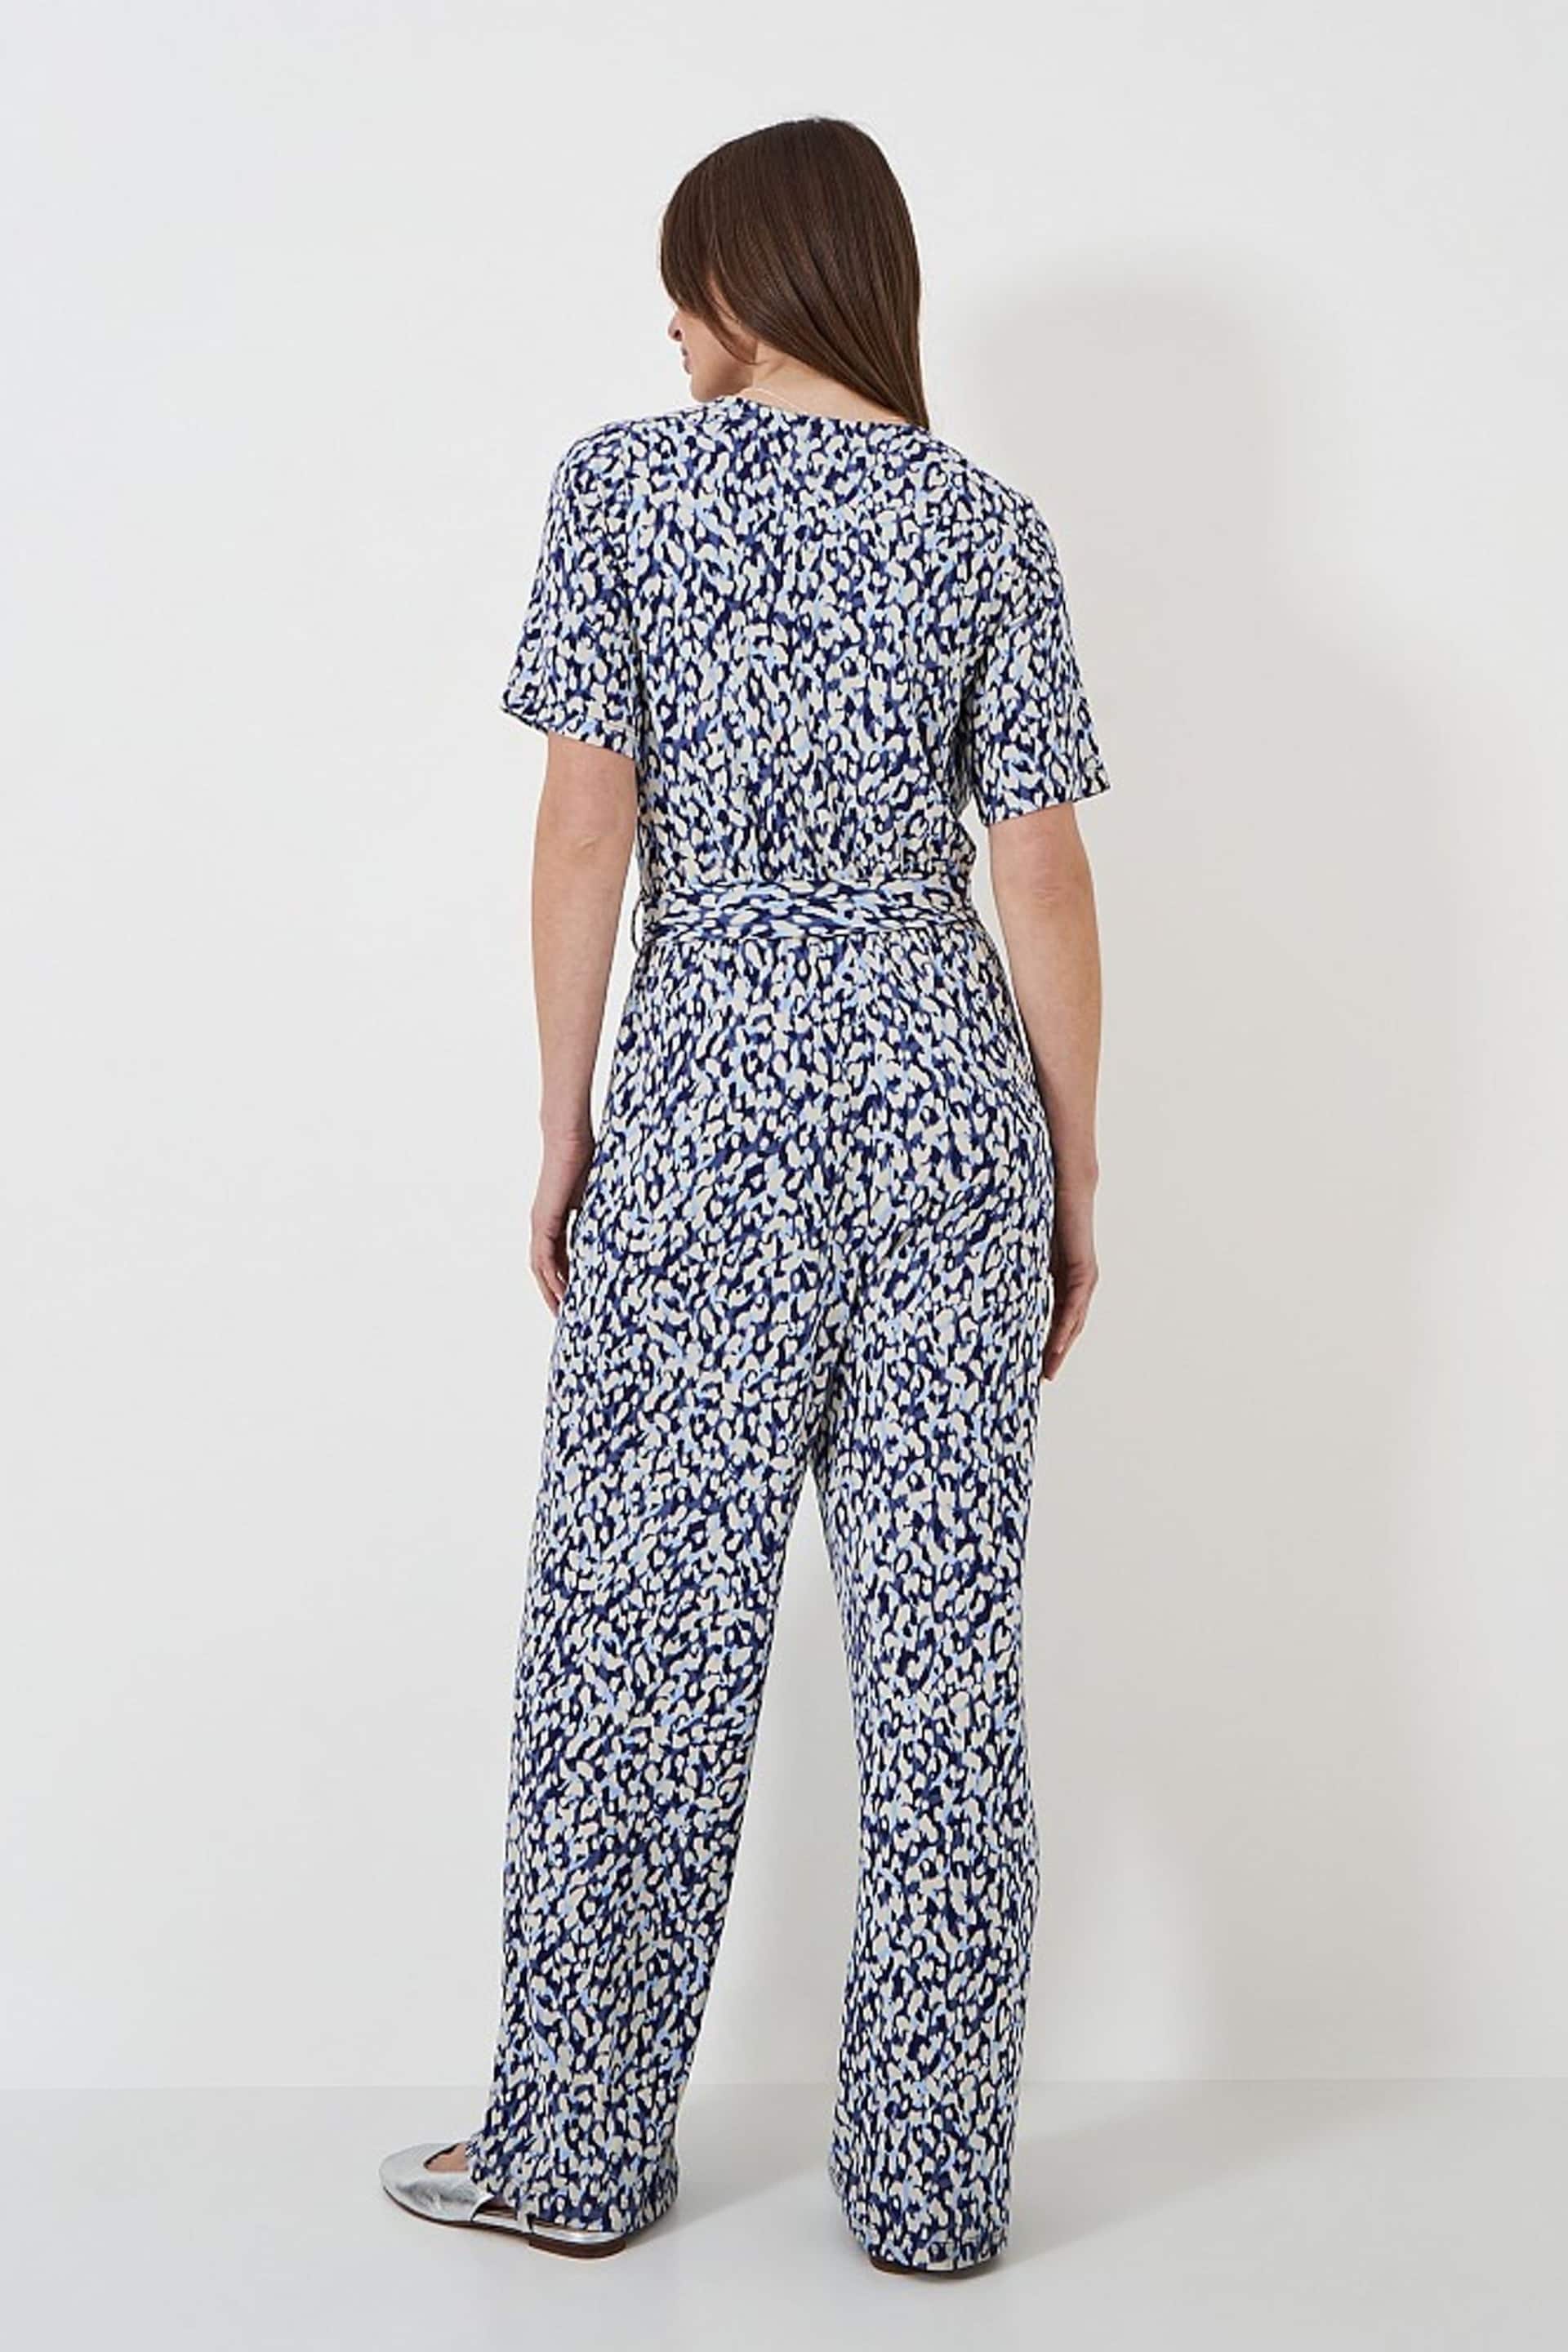 Crew Clothing Jersey Jumpsuit - Image 3 of 4